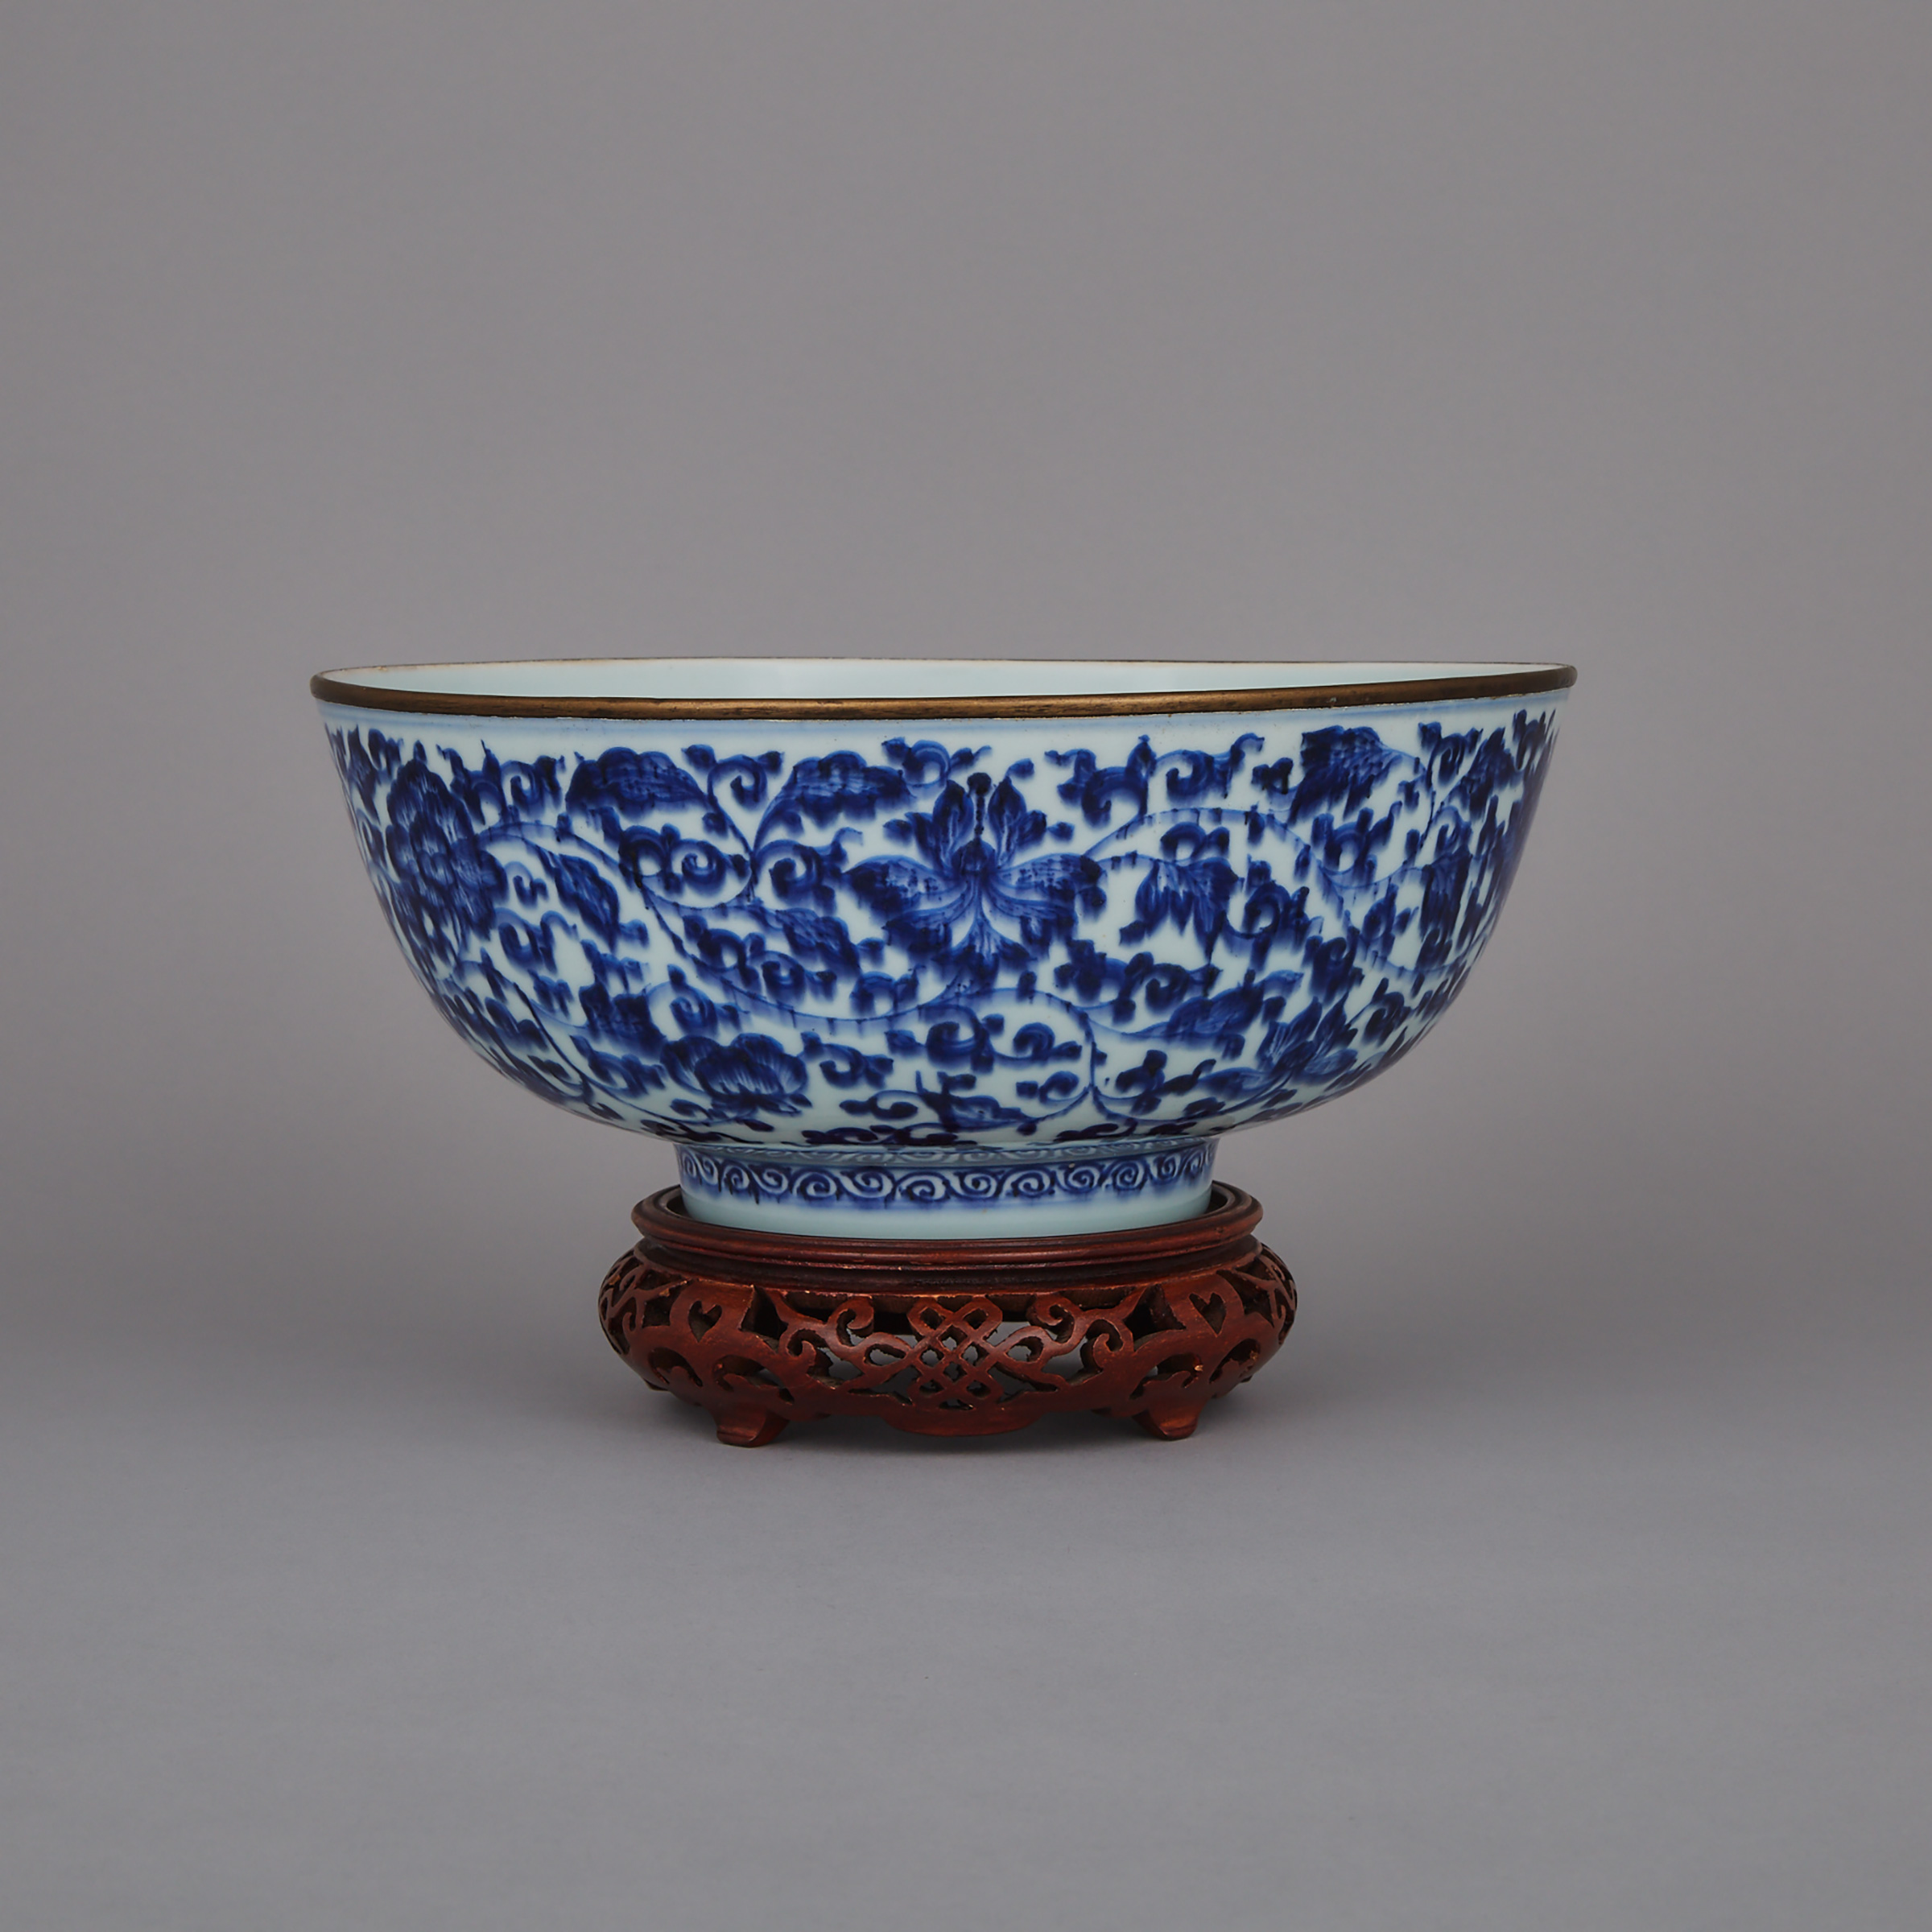 A Blue and White Punch Bowl, 17th/18th Century